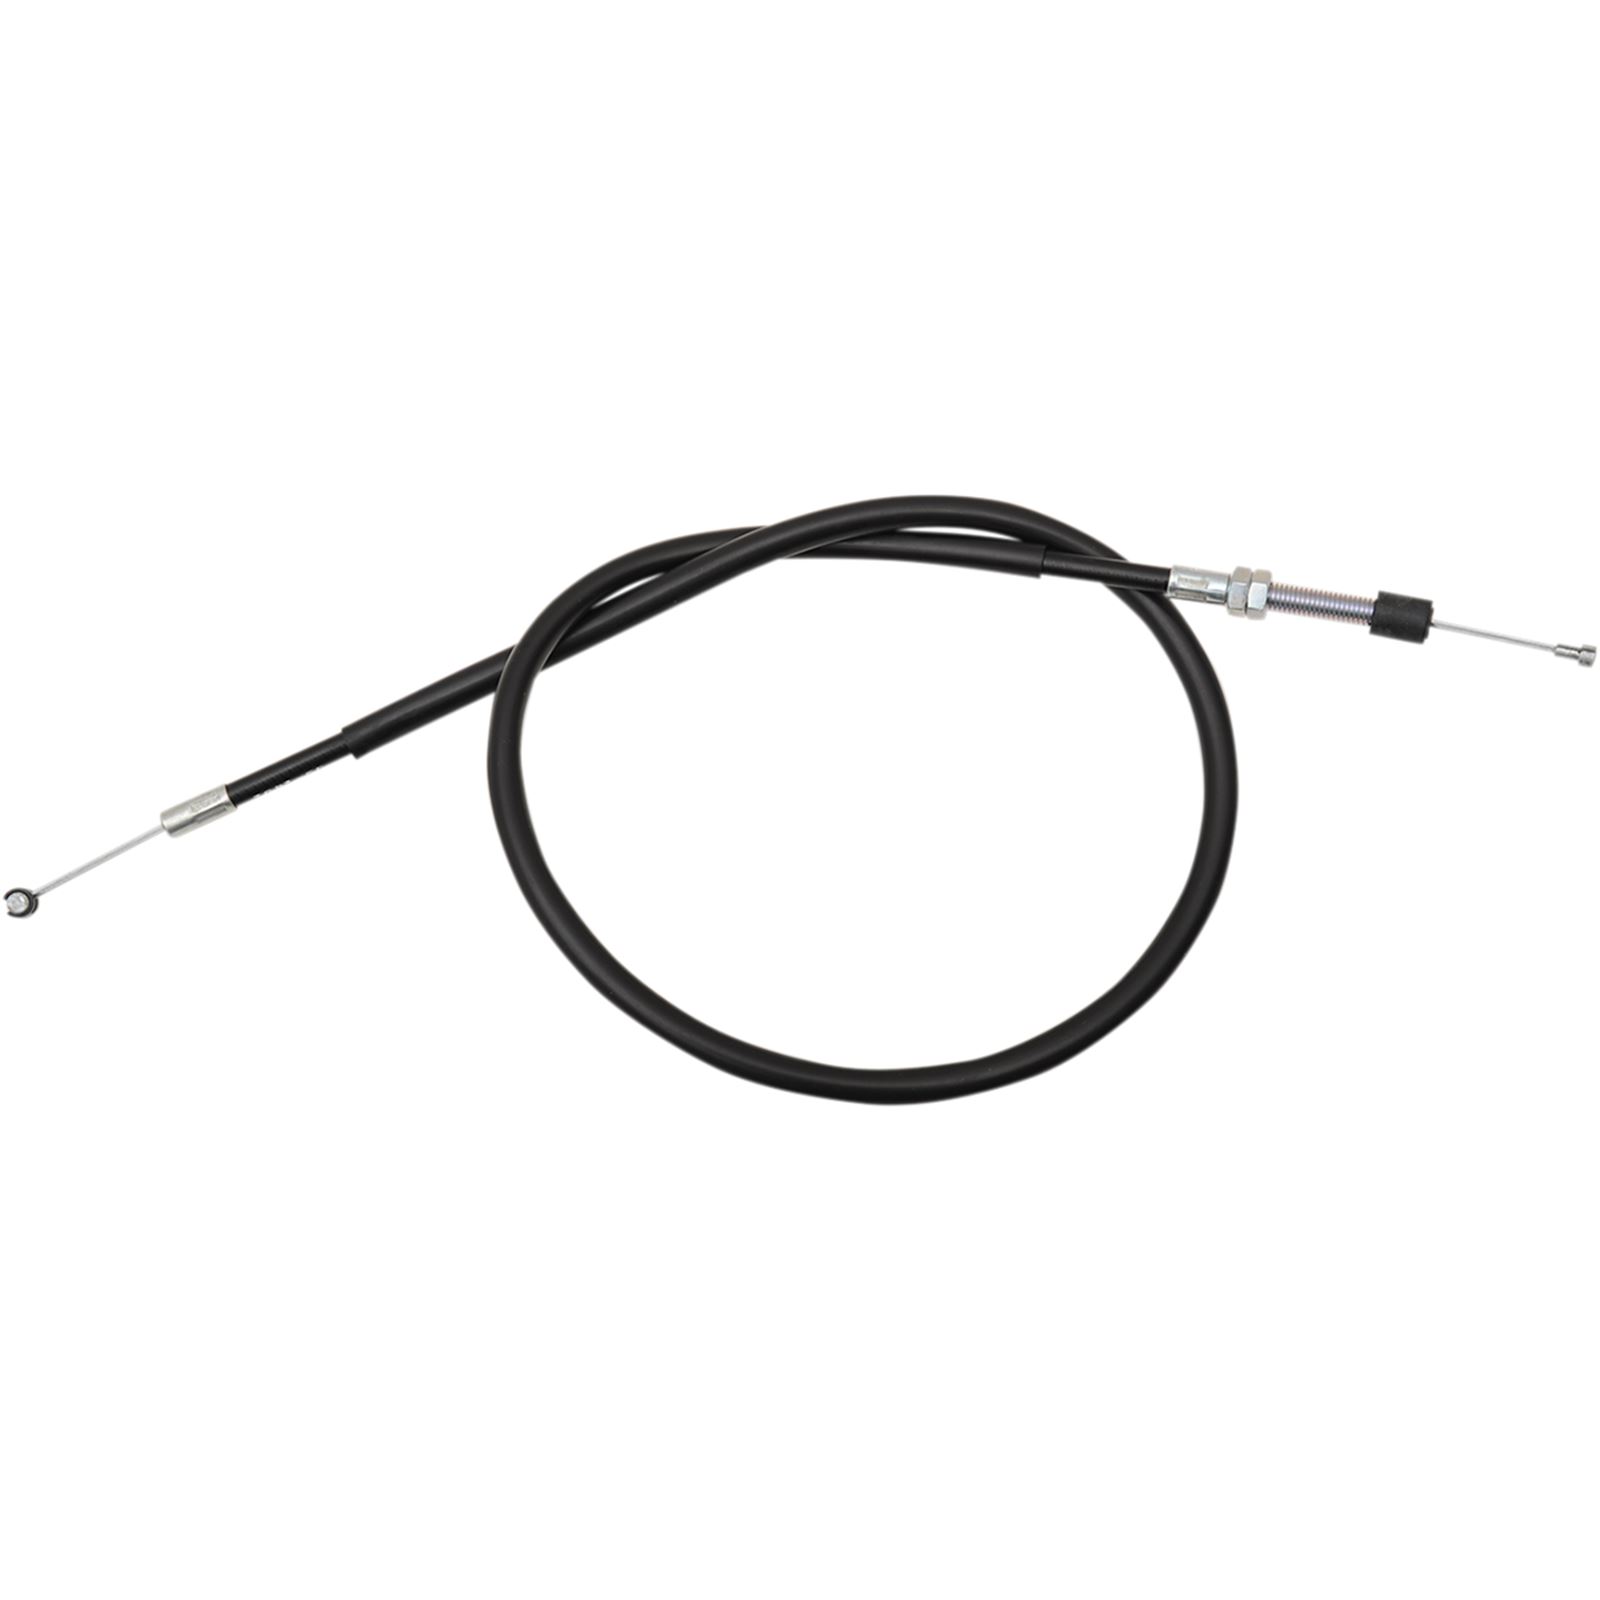 Moose Racing Moose Clutch Cable for Honda